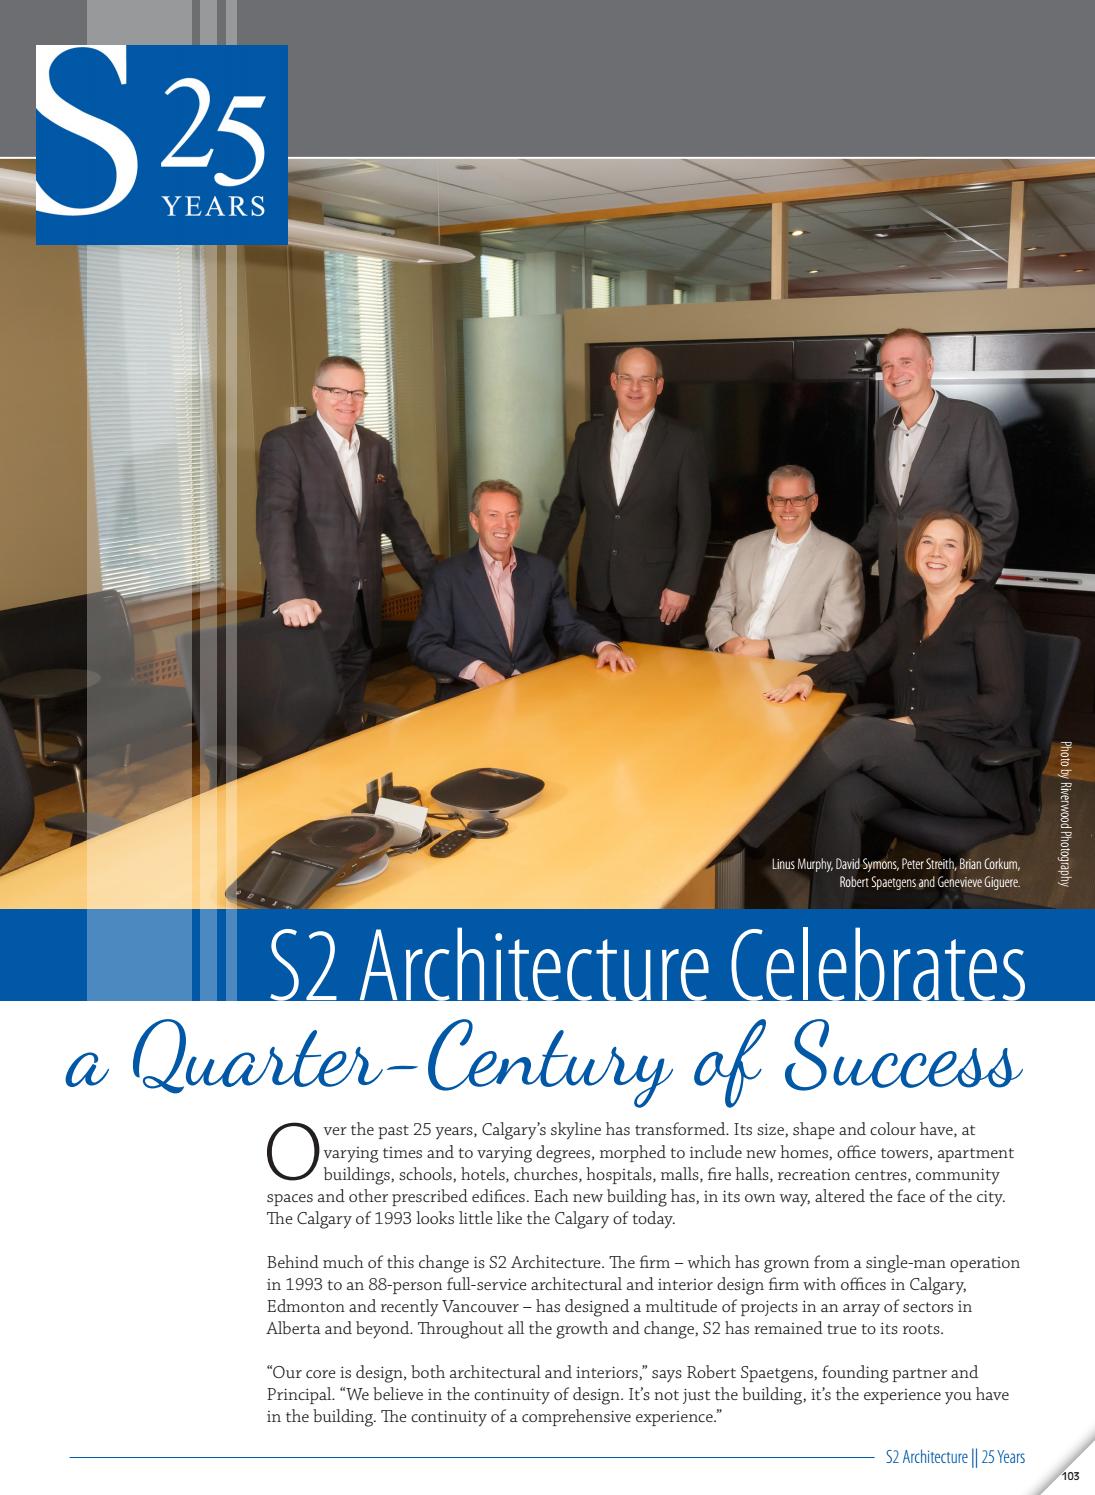 Business in Calgary Magazine - Business Profile for S2 Architecture